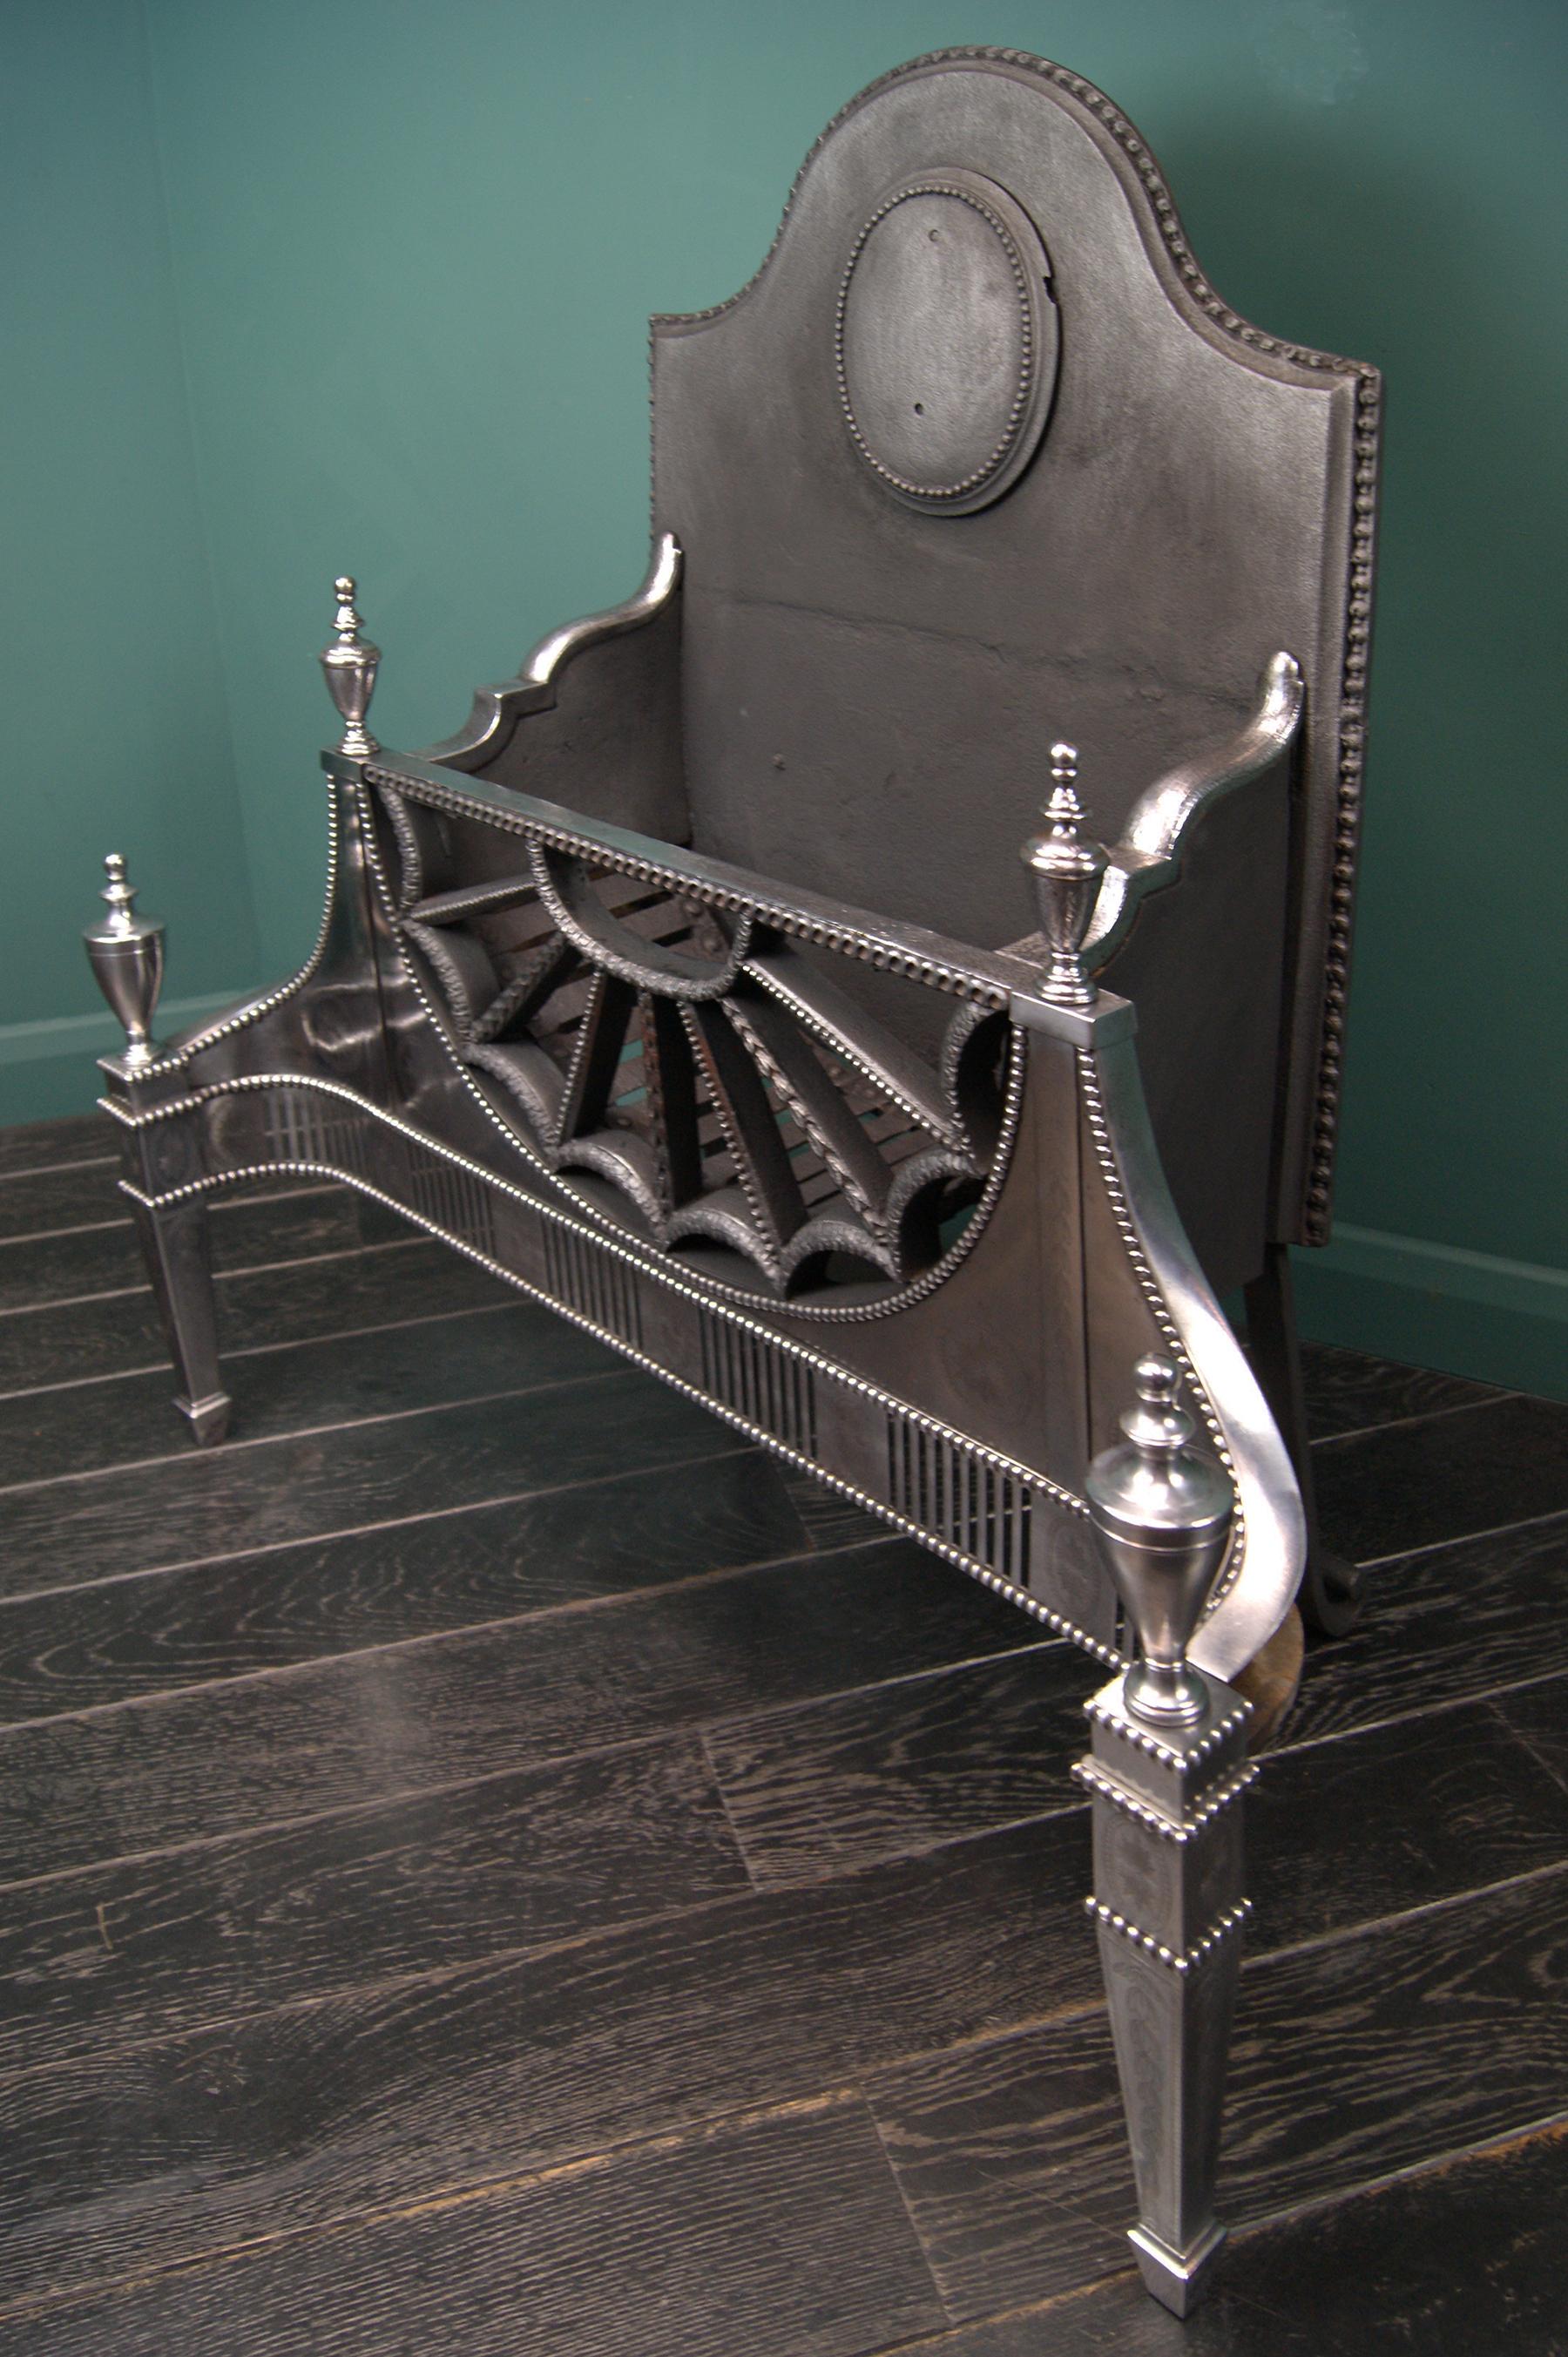 A fine free-standing fire grate in the manner of Robert Adam with a semi-circular fan-fronted fire basket adorned with harebells and interlocking circles. The cut-steel polished front and fret are intricately engraved. The pierced fluted fret is set